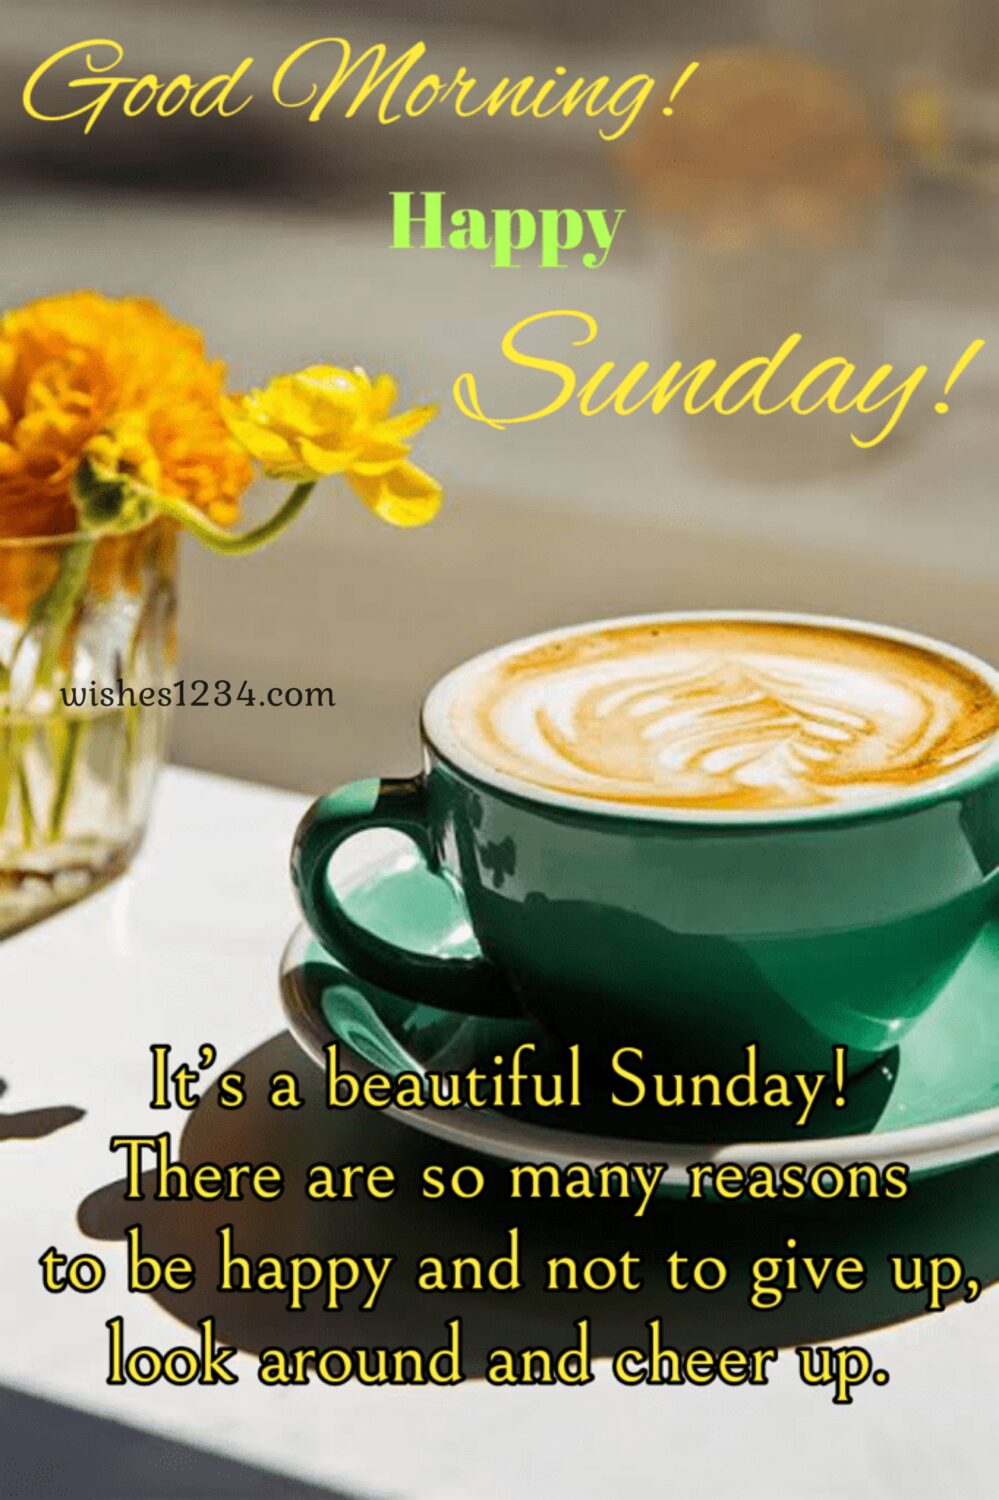 Cup of Latte coffee, Sunday Quotes image, Good Morning Sunday blessings.